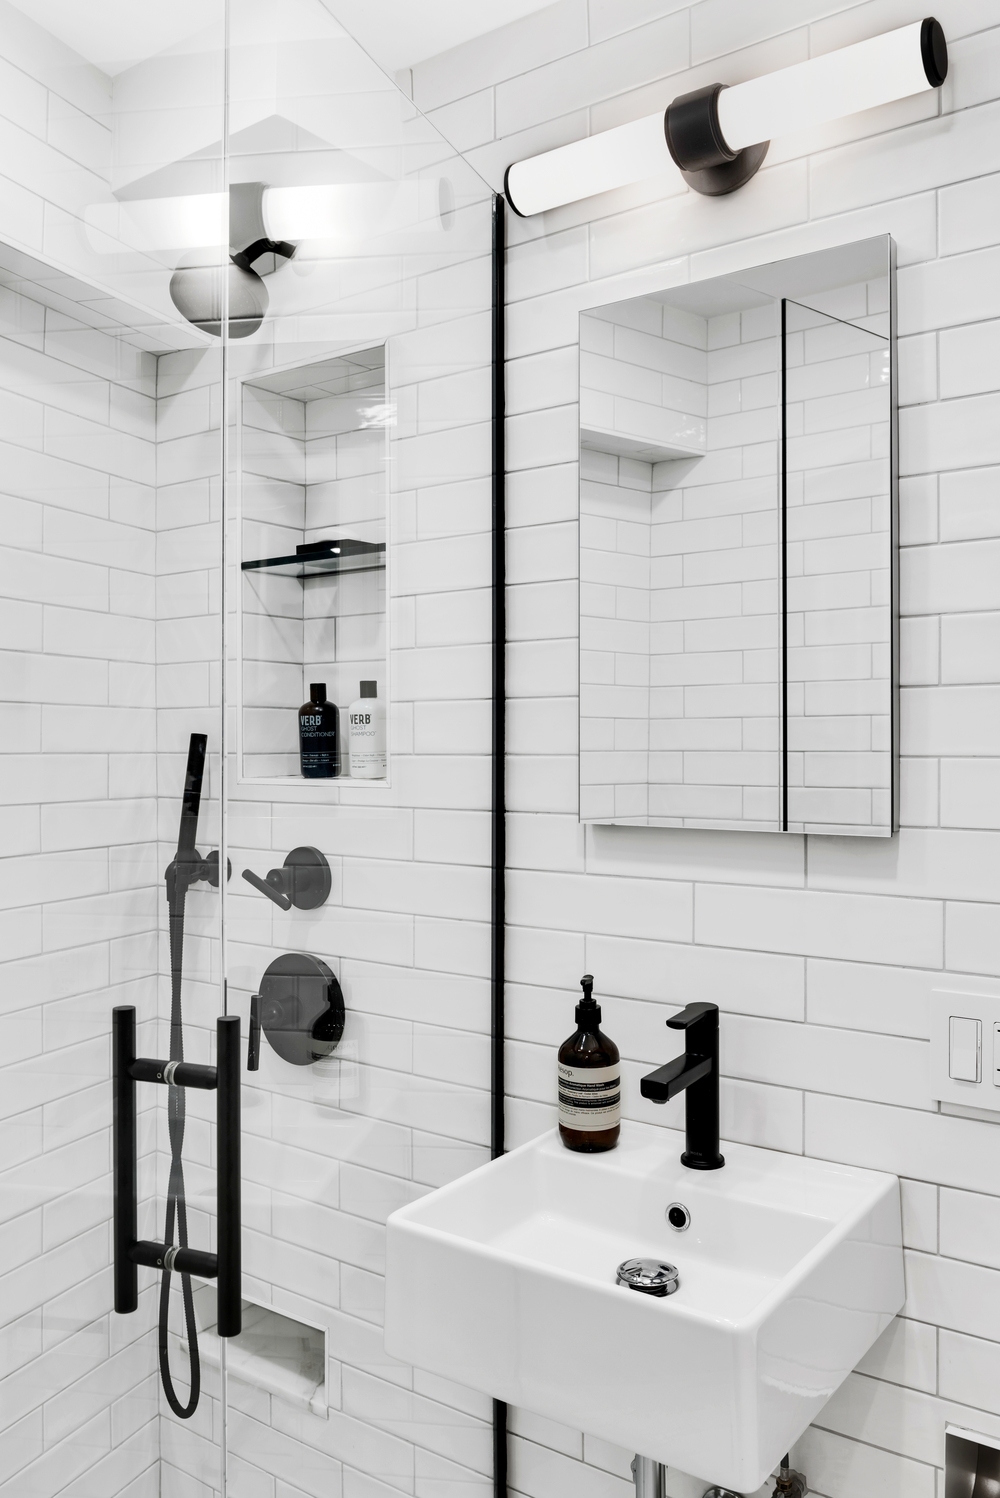 Bathroom remodel with glass shower doors, white subway tile, and matte black fixtures.